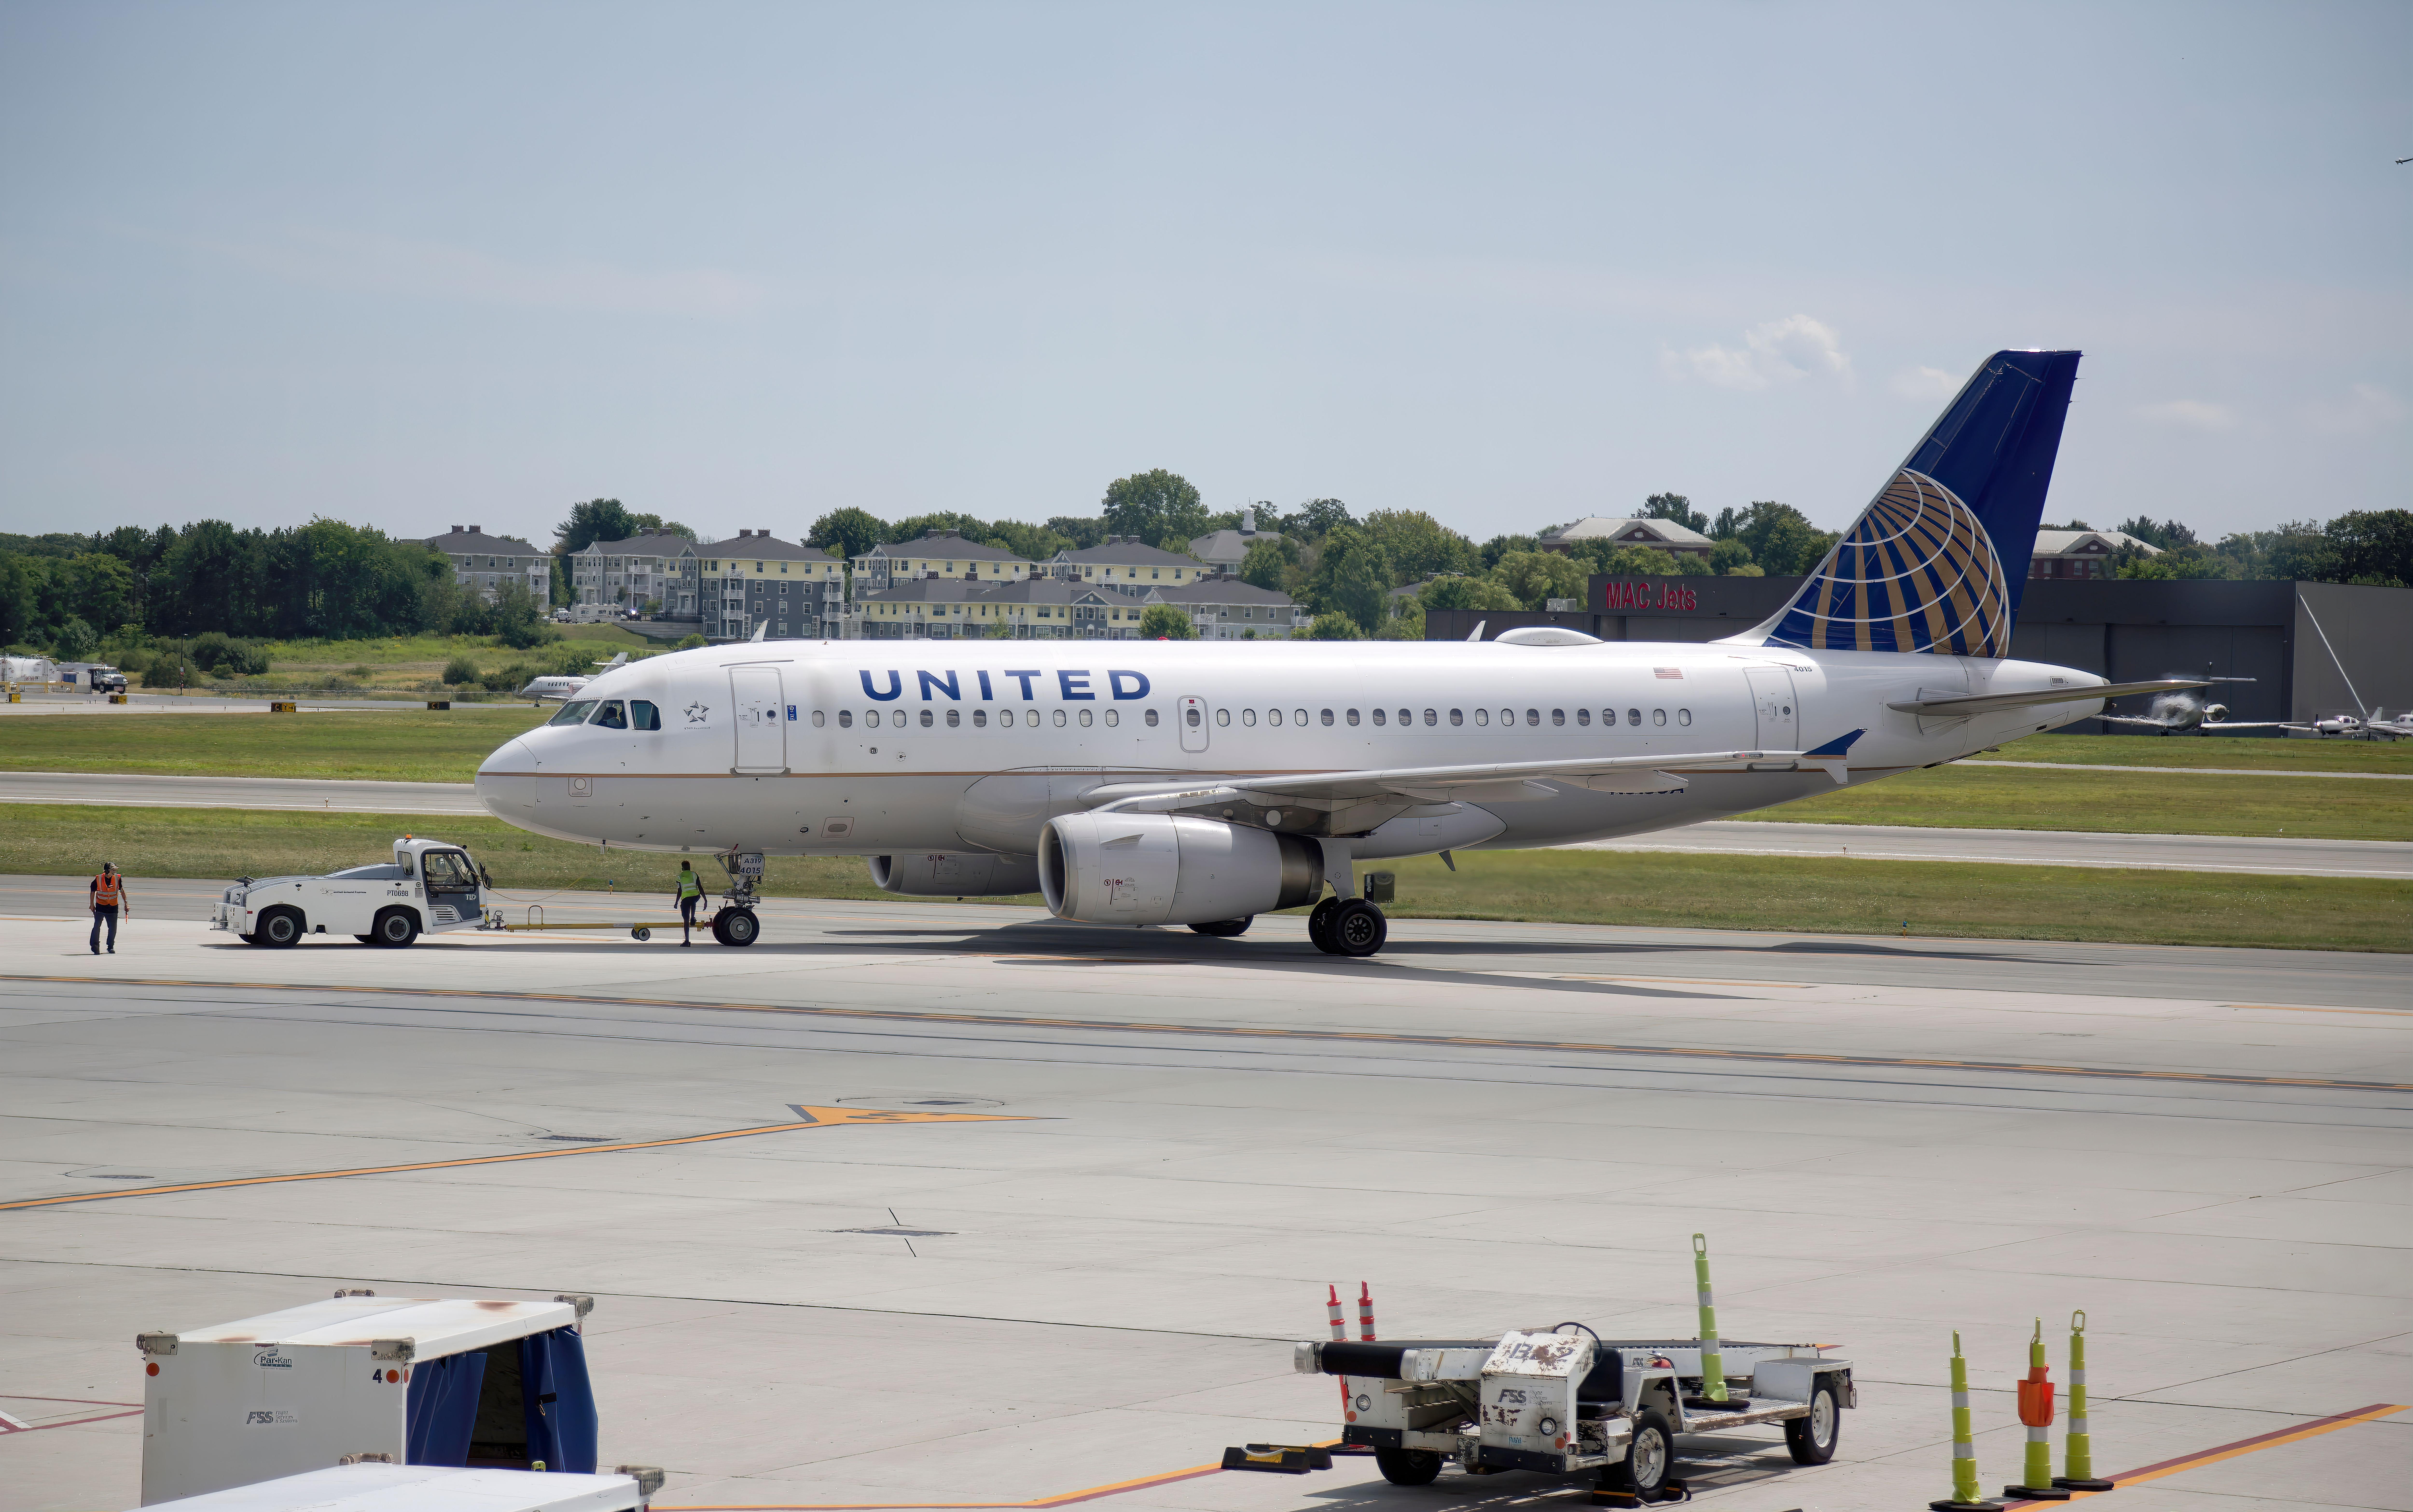 United Airlines Airbus A319-132 taxis to the gate after landing.